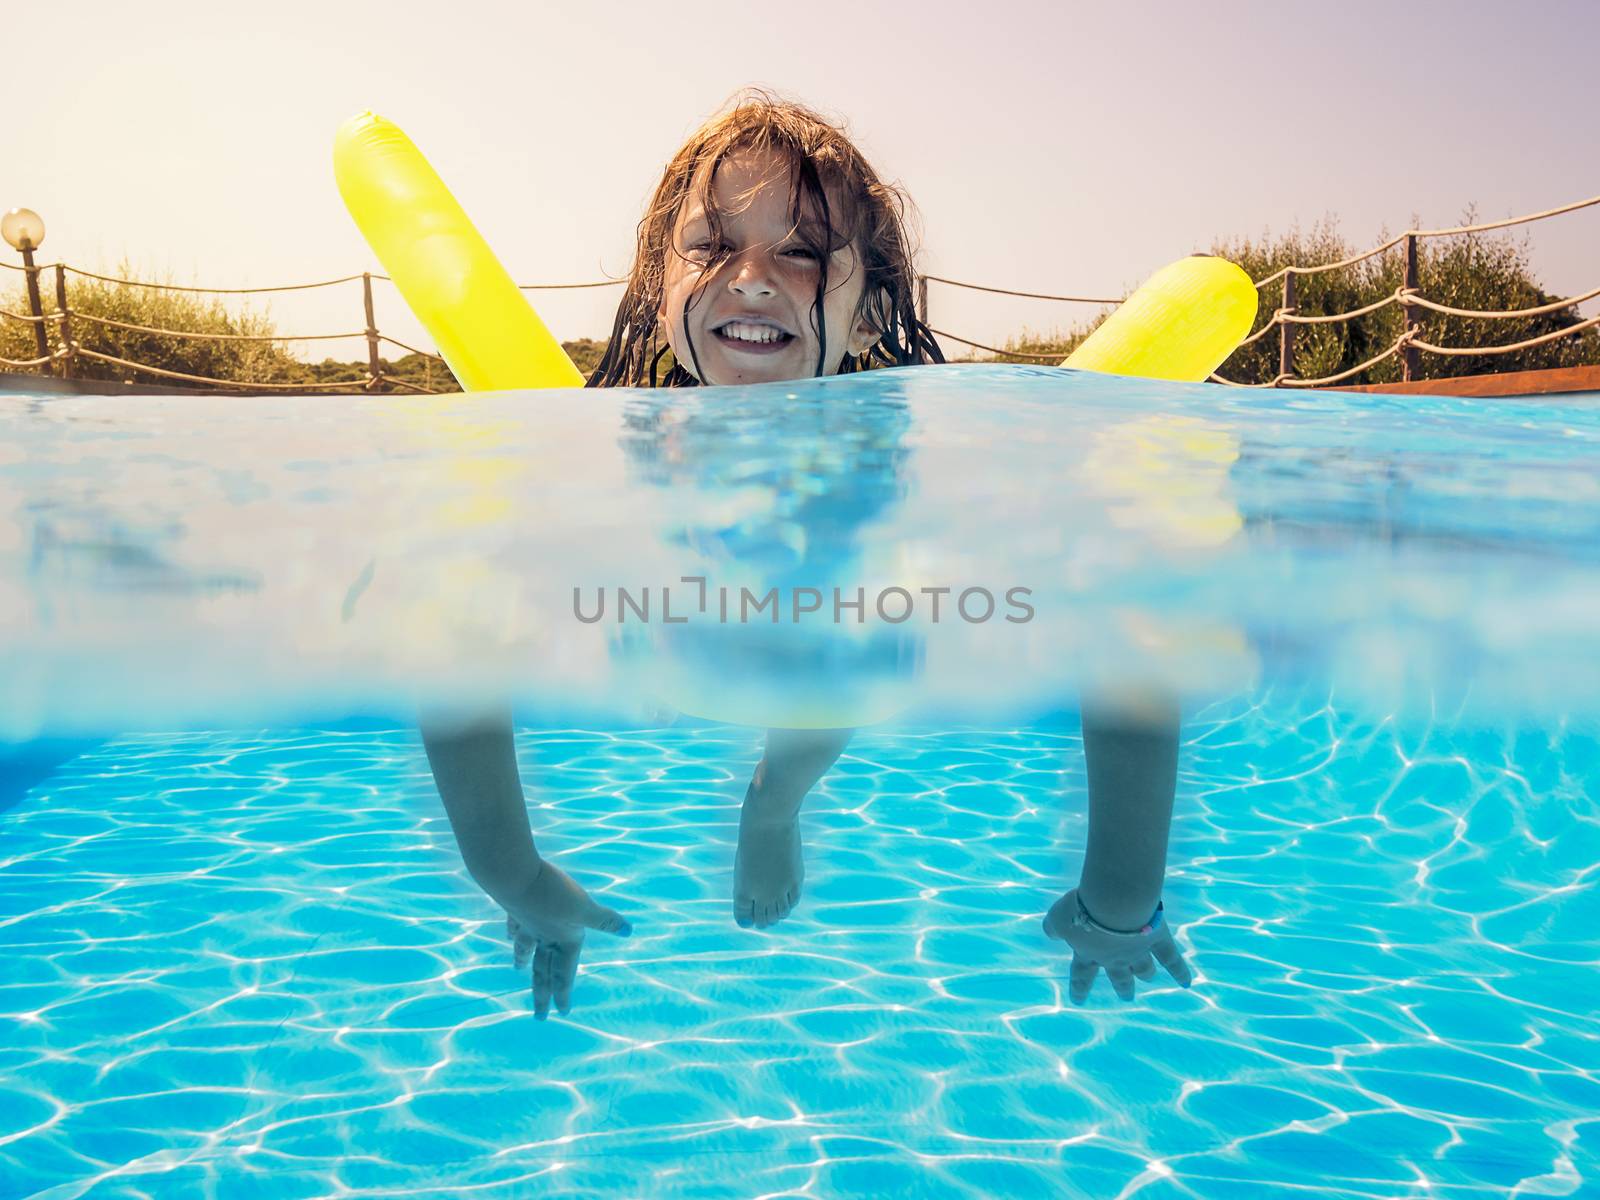 Underwater view of a girl swimming smiling toward the camera with her yellow float in the pool, behind her the glow of the summery sun gleams golden